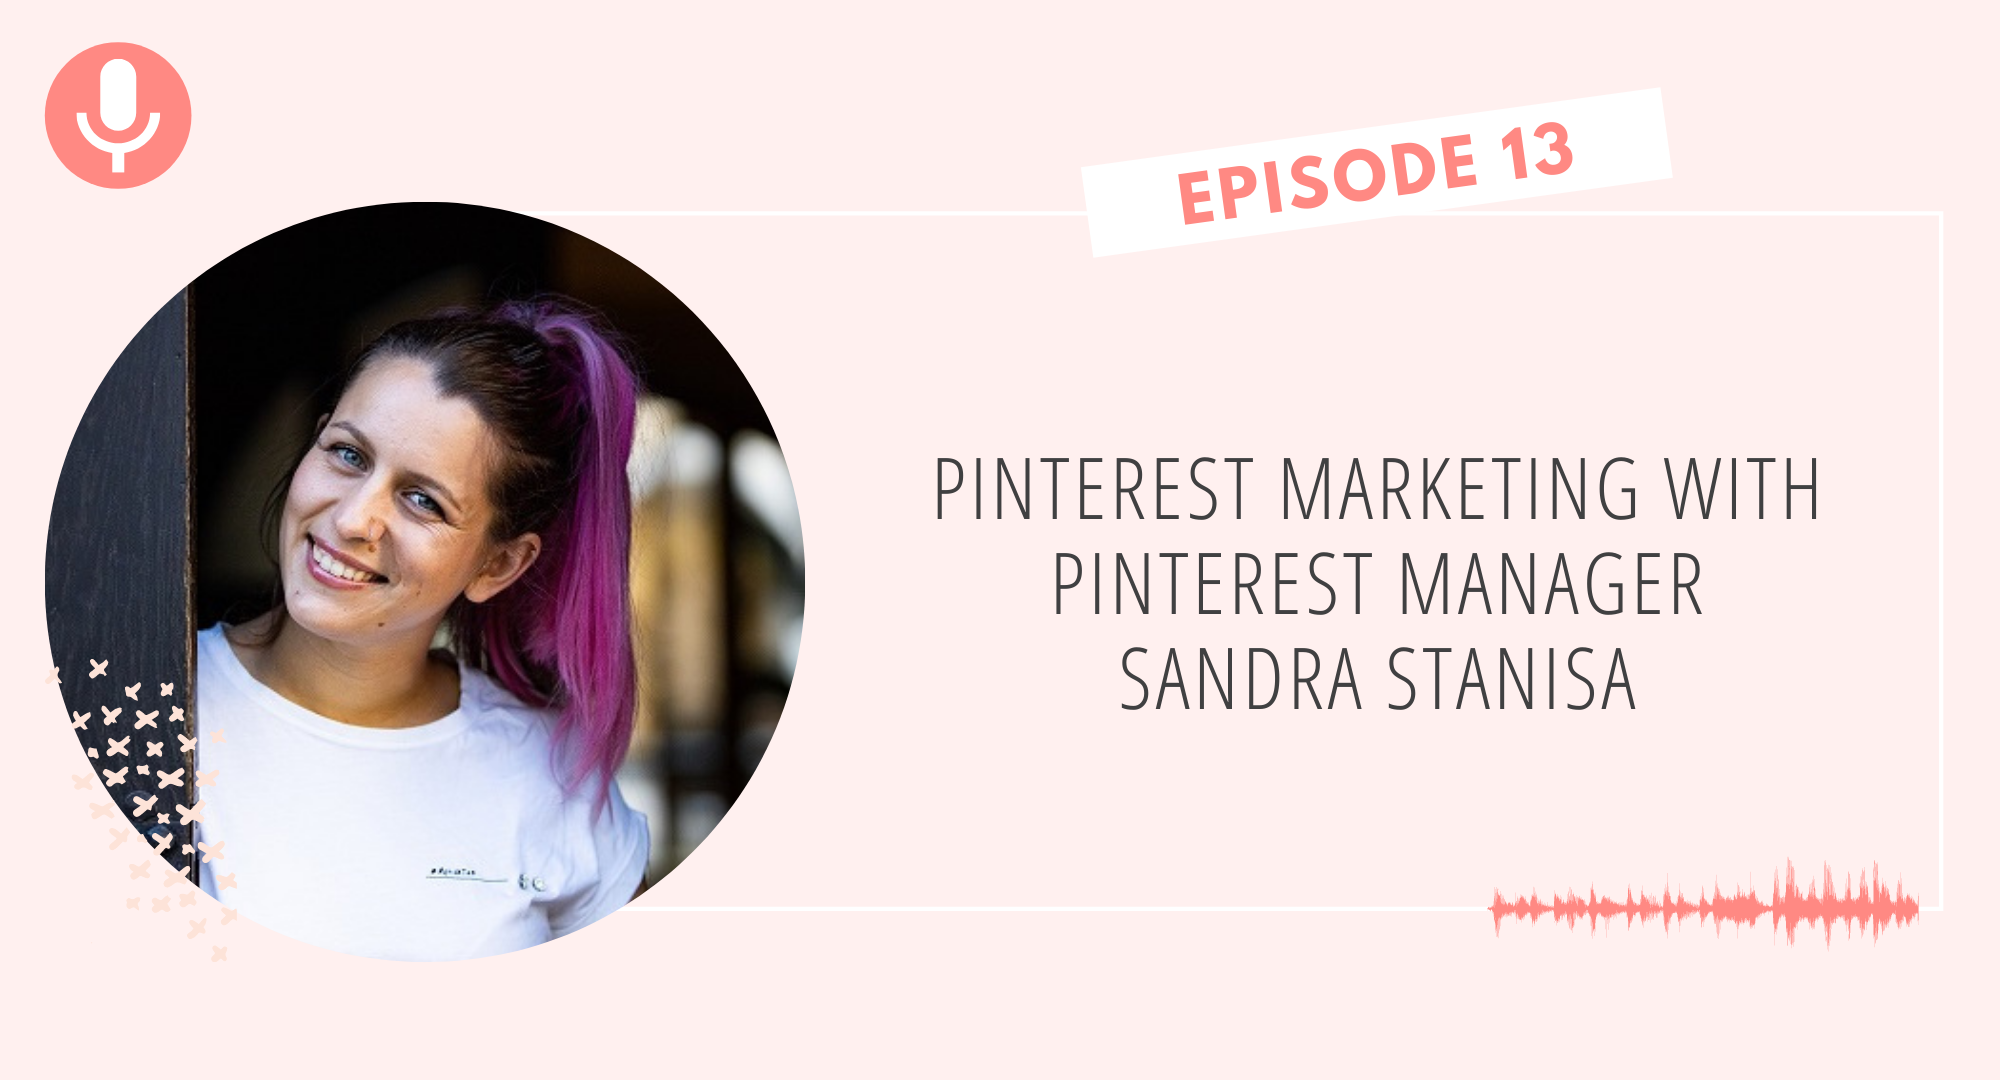 Pinterest Marketing Advice from a Pinterest Manager